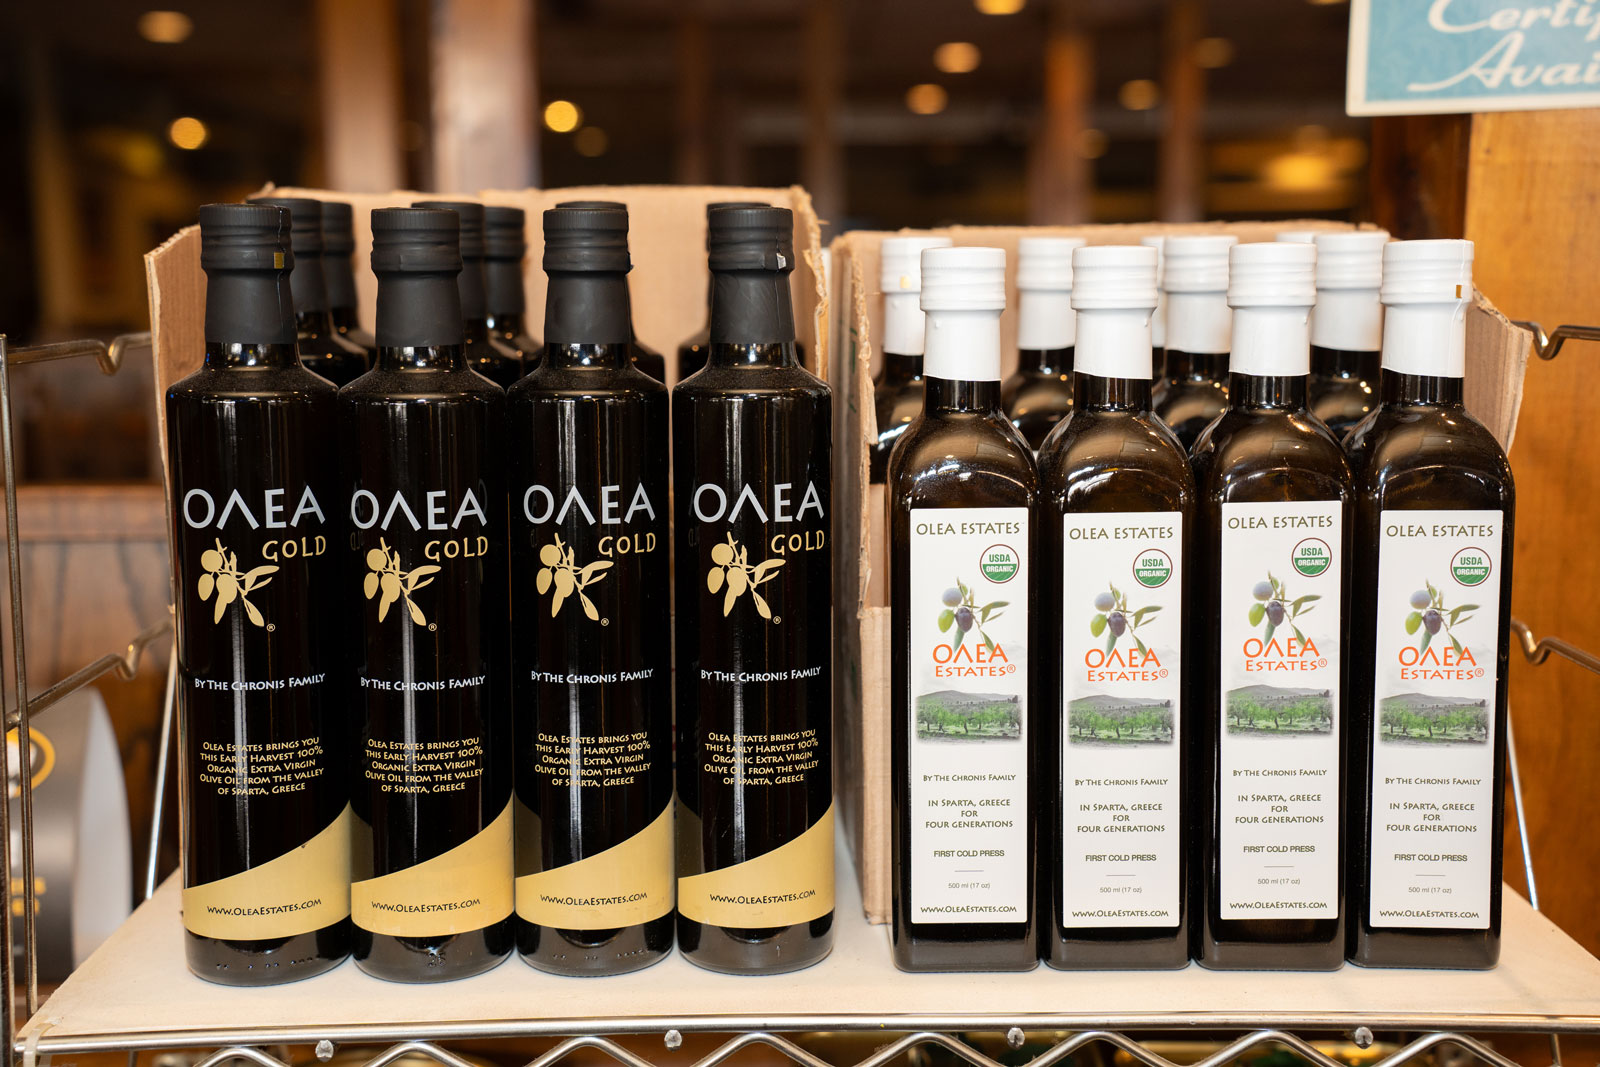 Olive Oil from G&D Pizzaria